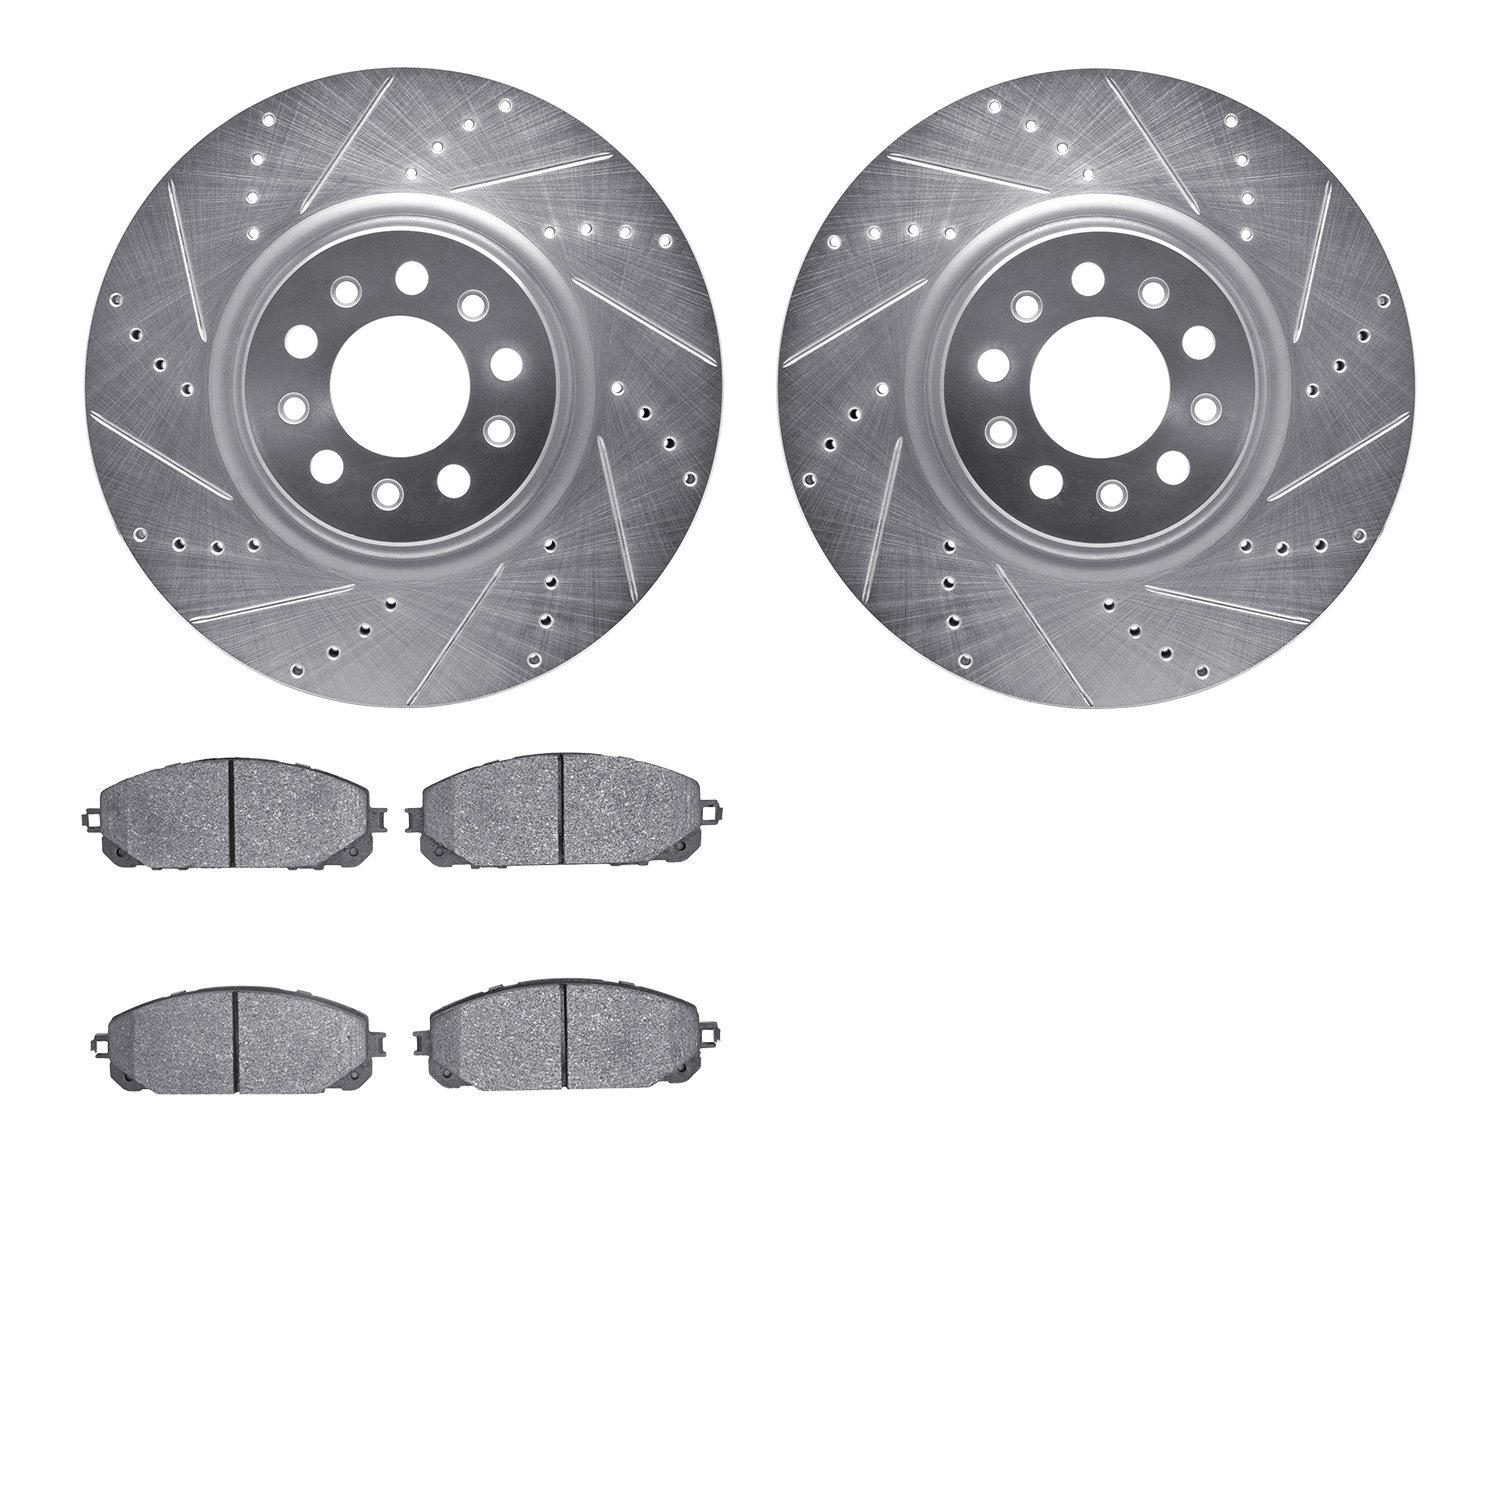 7402-42015 Drilled/Slotted Brake Rotors with Ultimate-Duty Brake Pads Kit [Silver], Fits Select Mopar, Position: Front